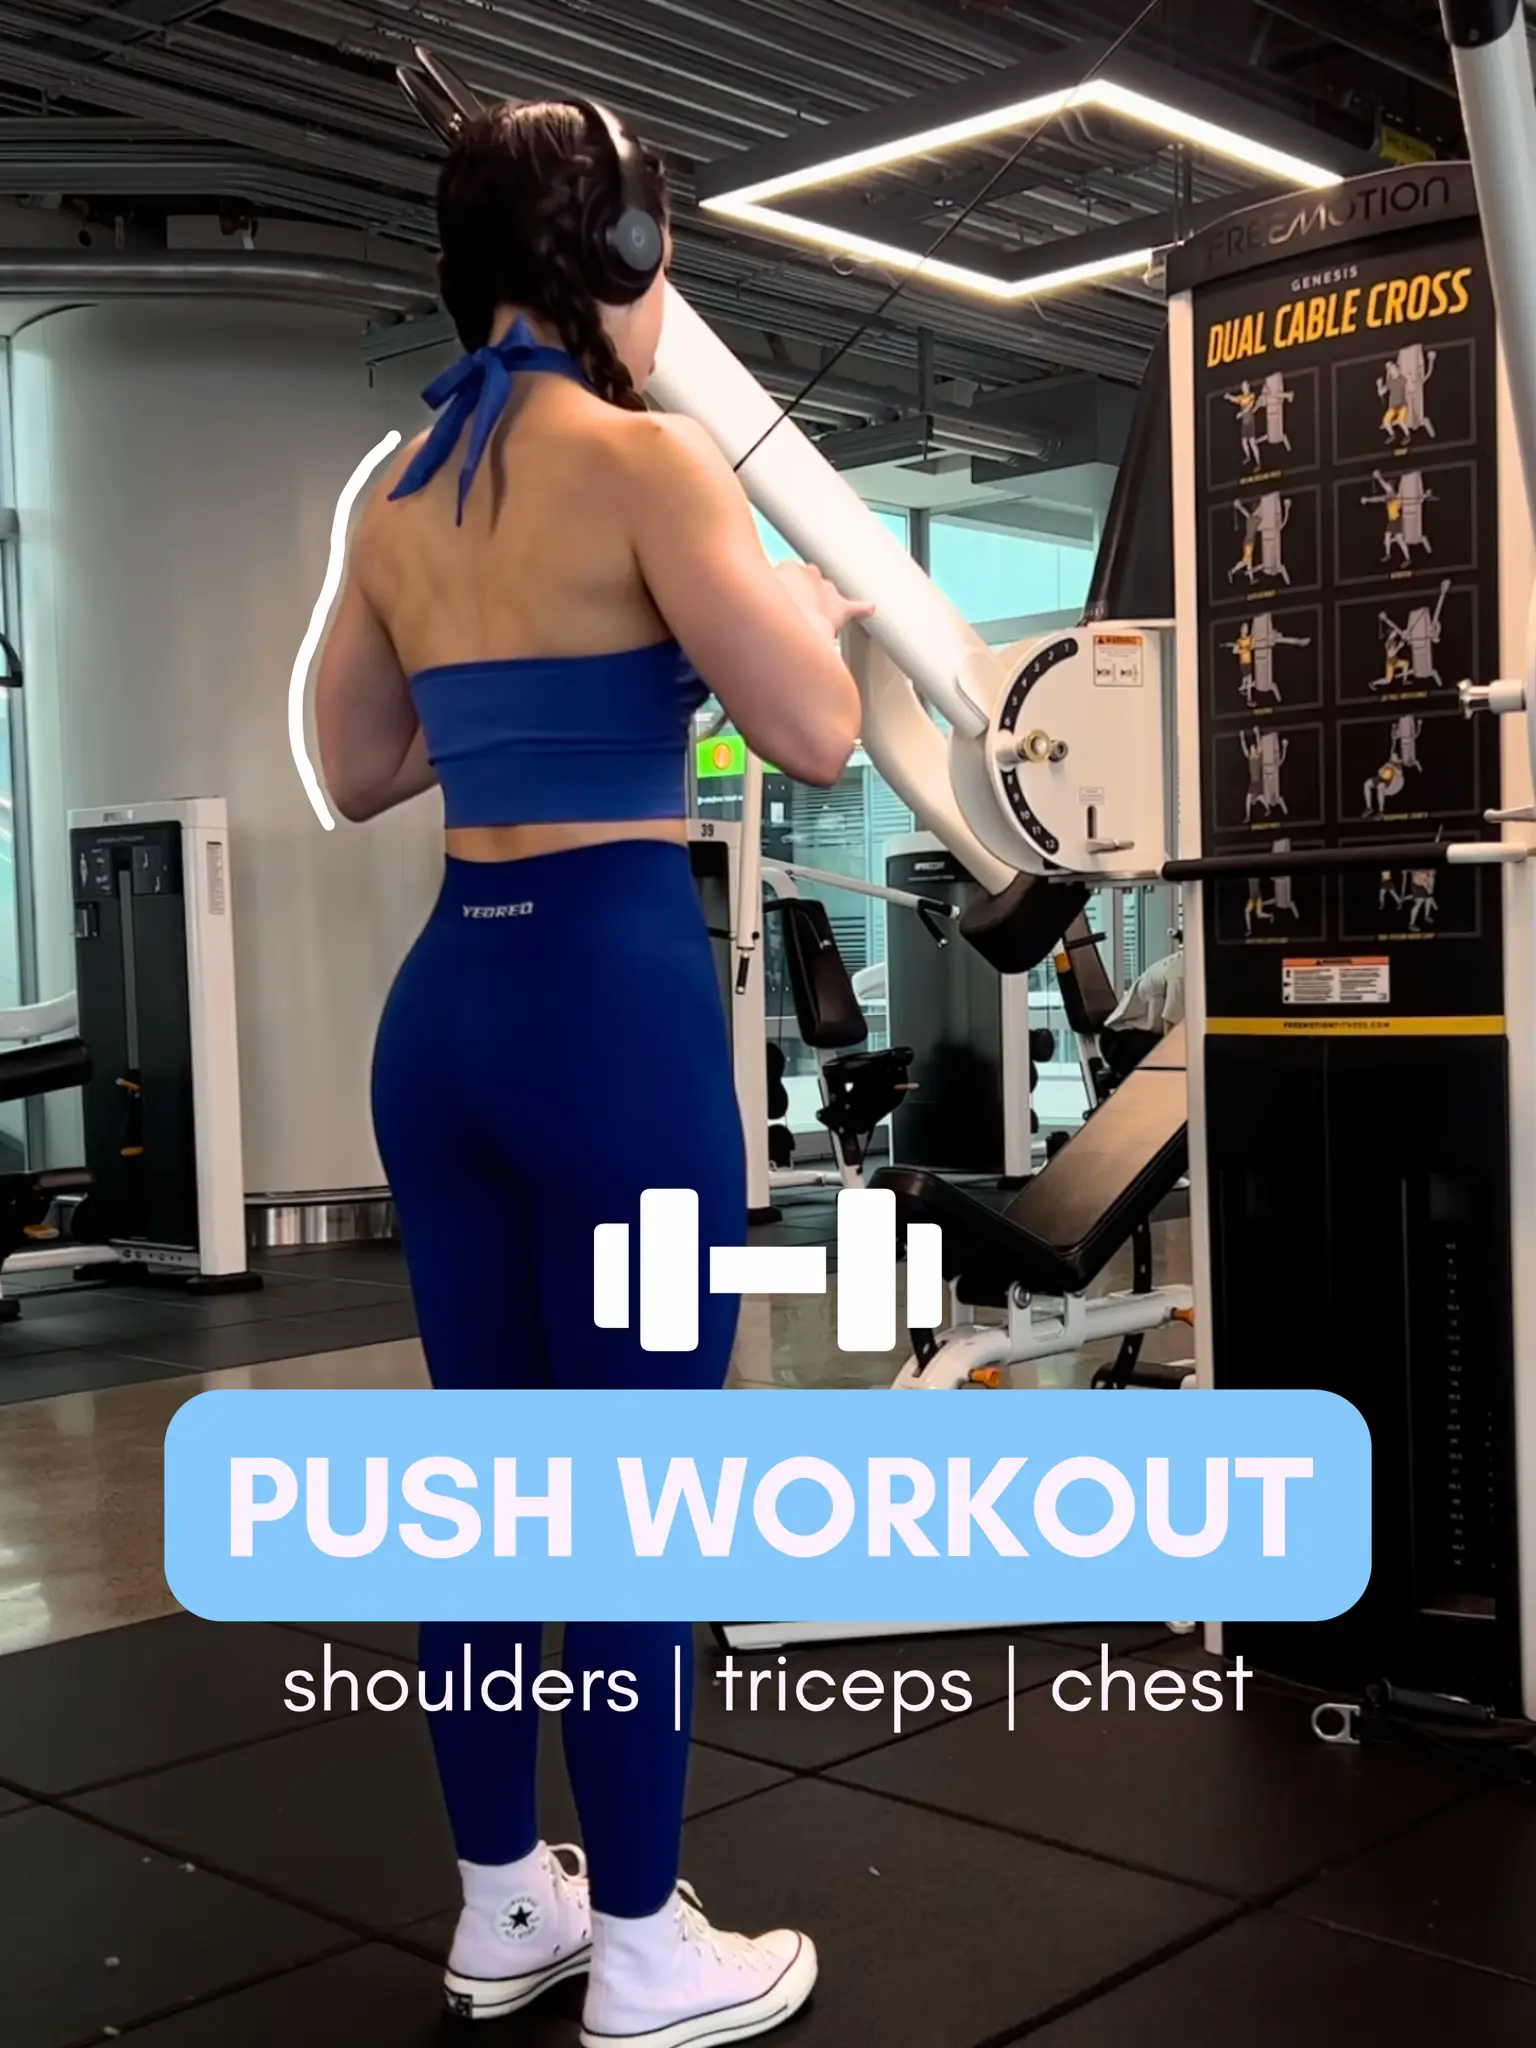 Free Workout: Triceps, Biceps, Forearms & Shoulders - 3x